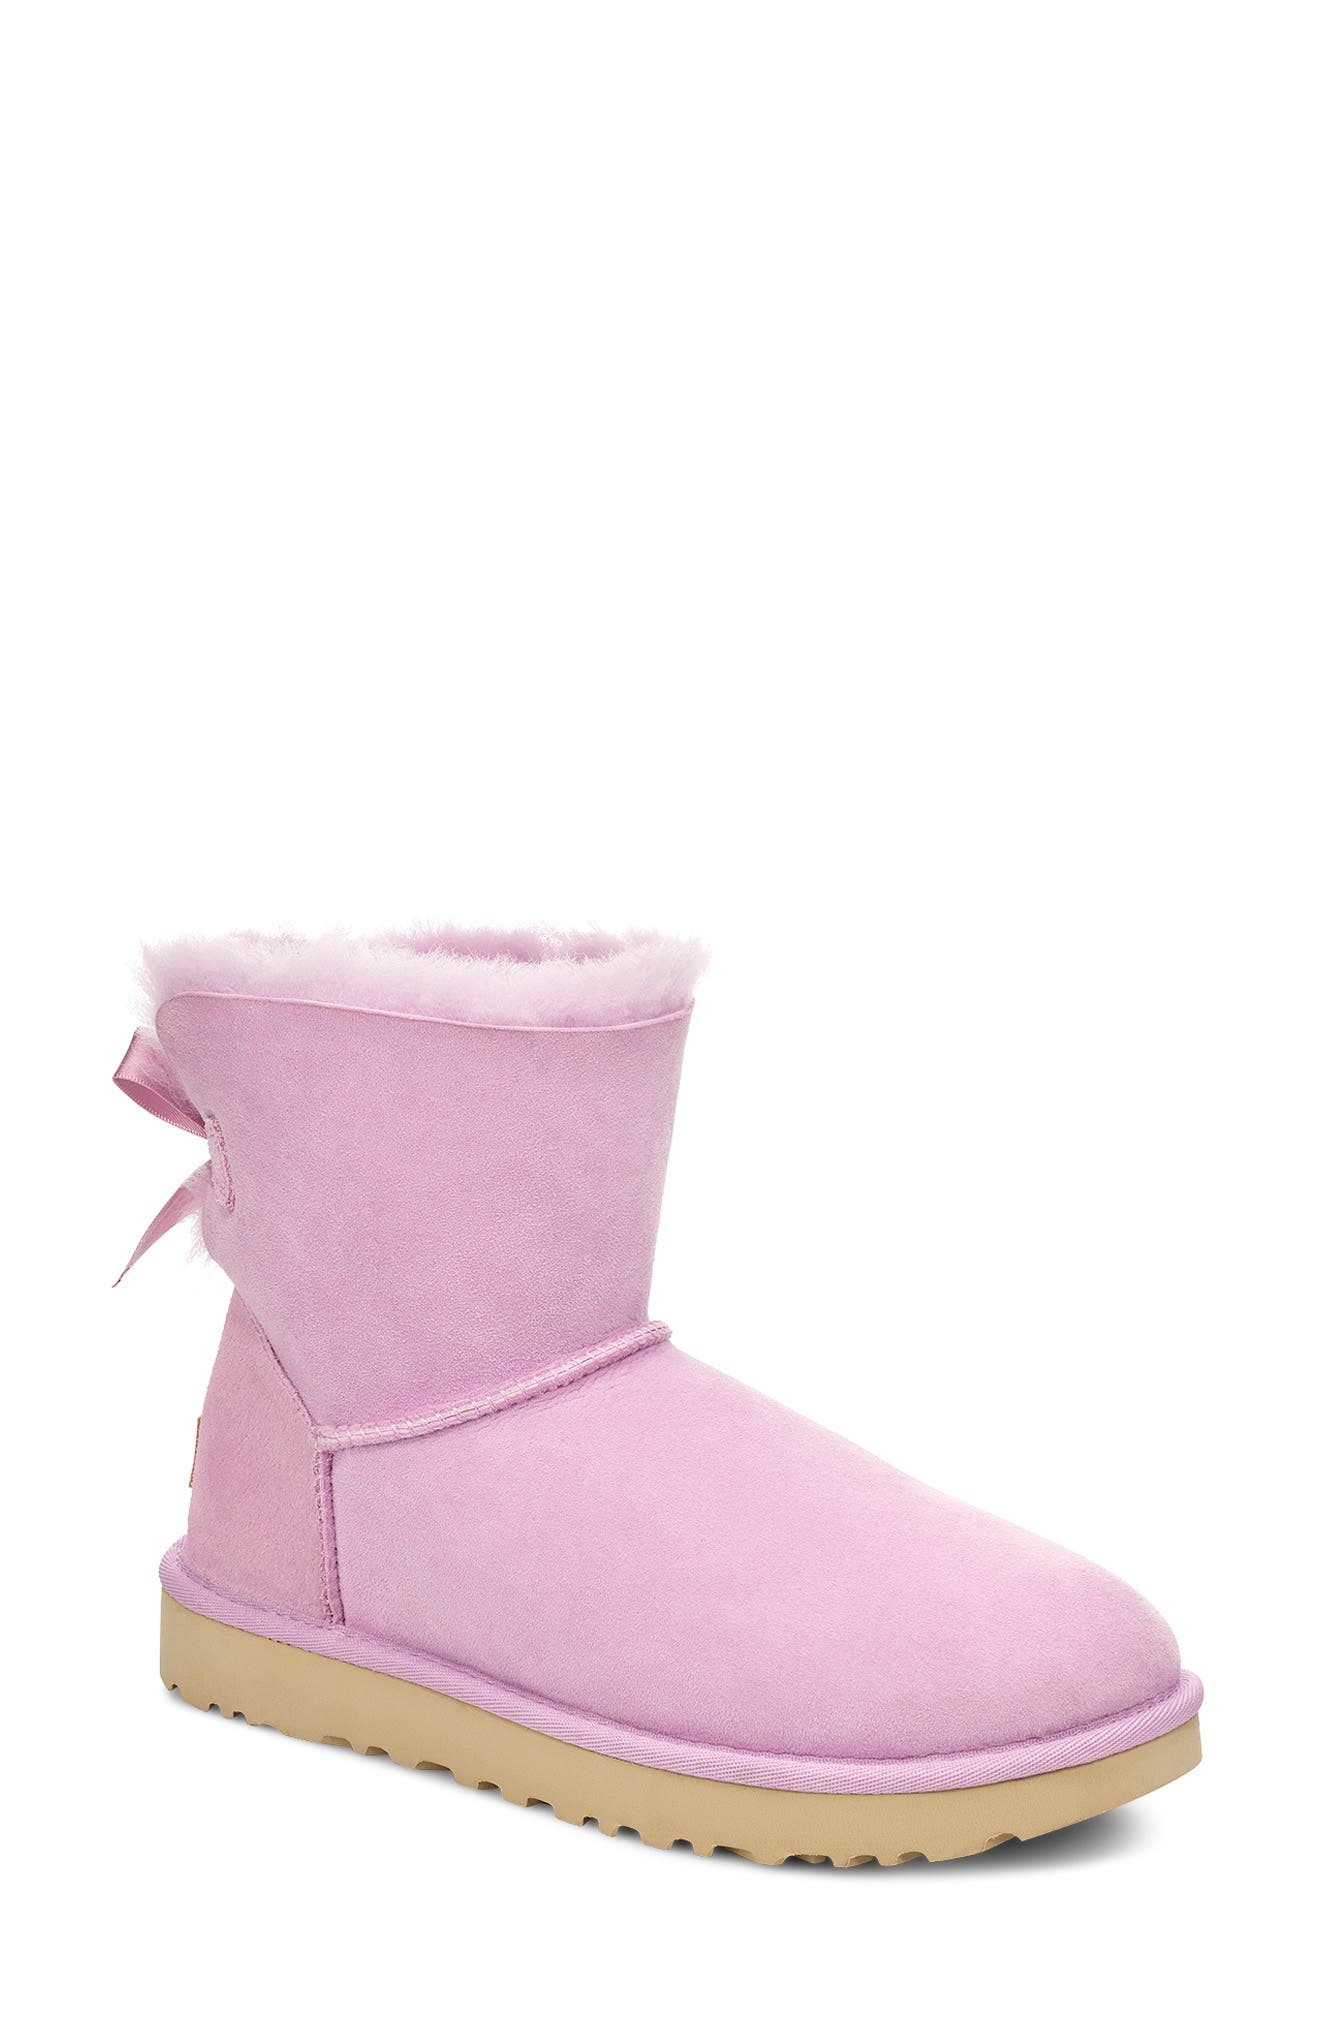 rose gold bailey bow uggs